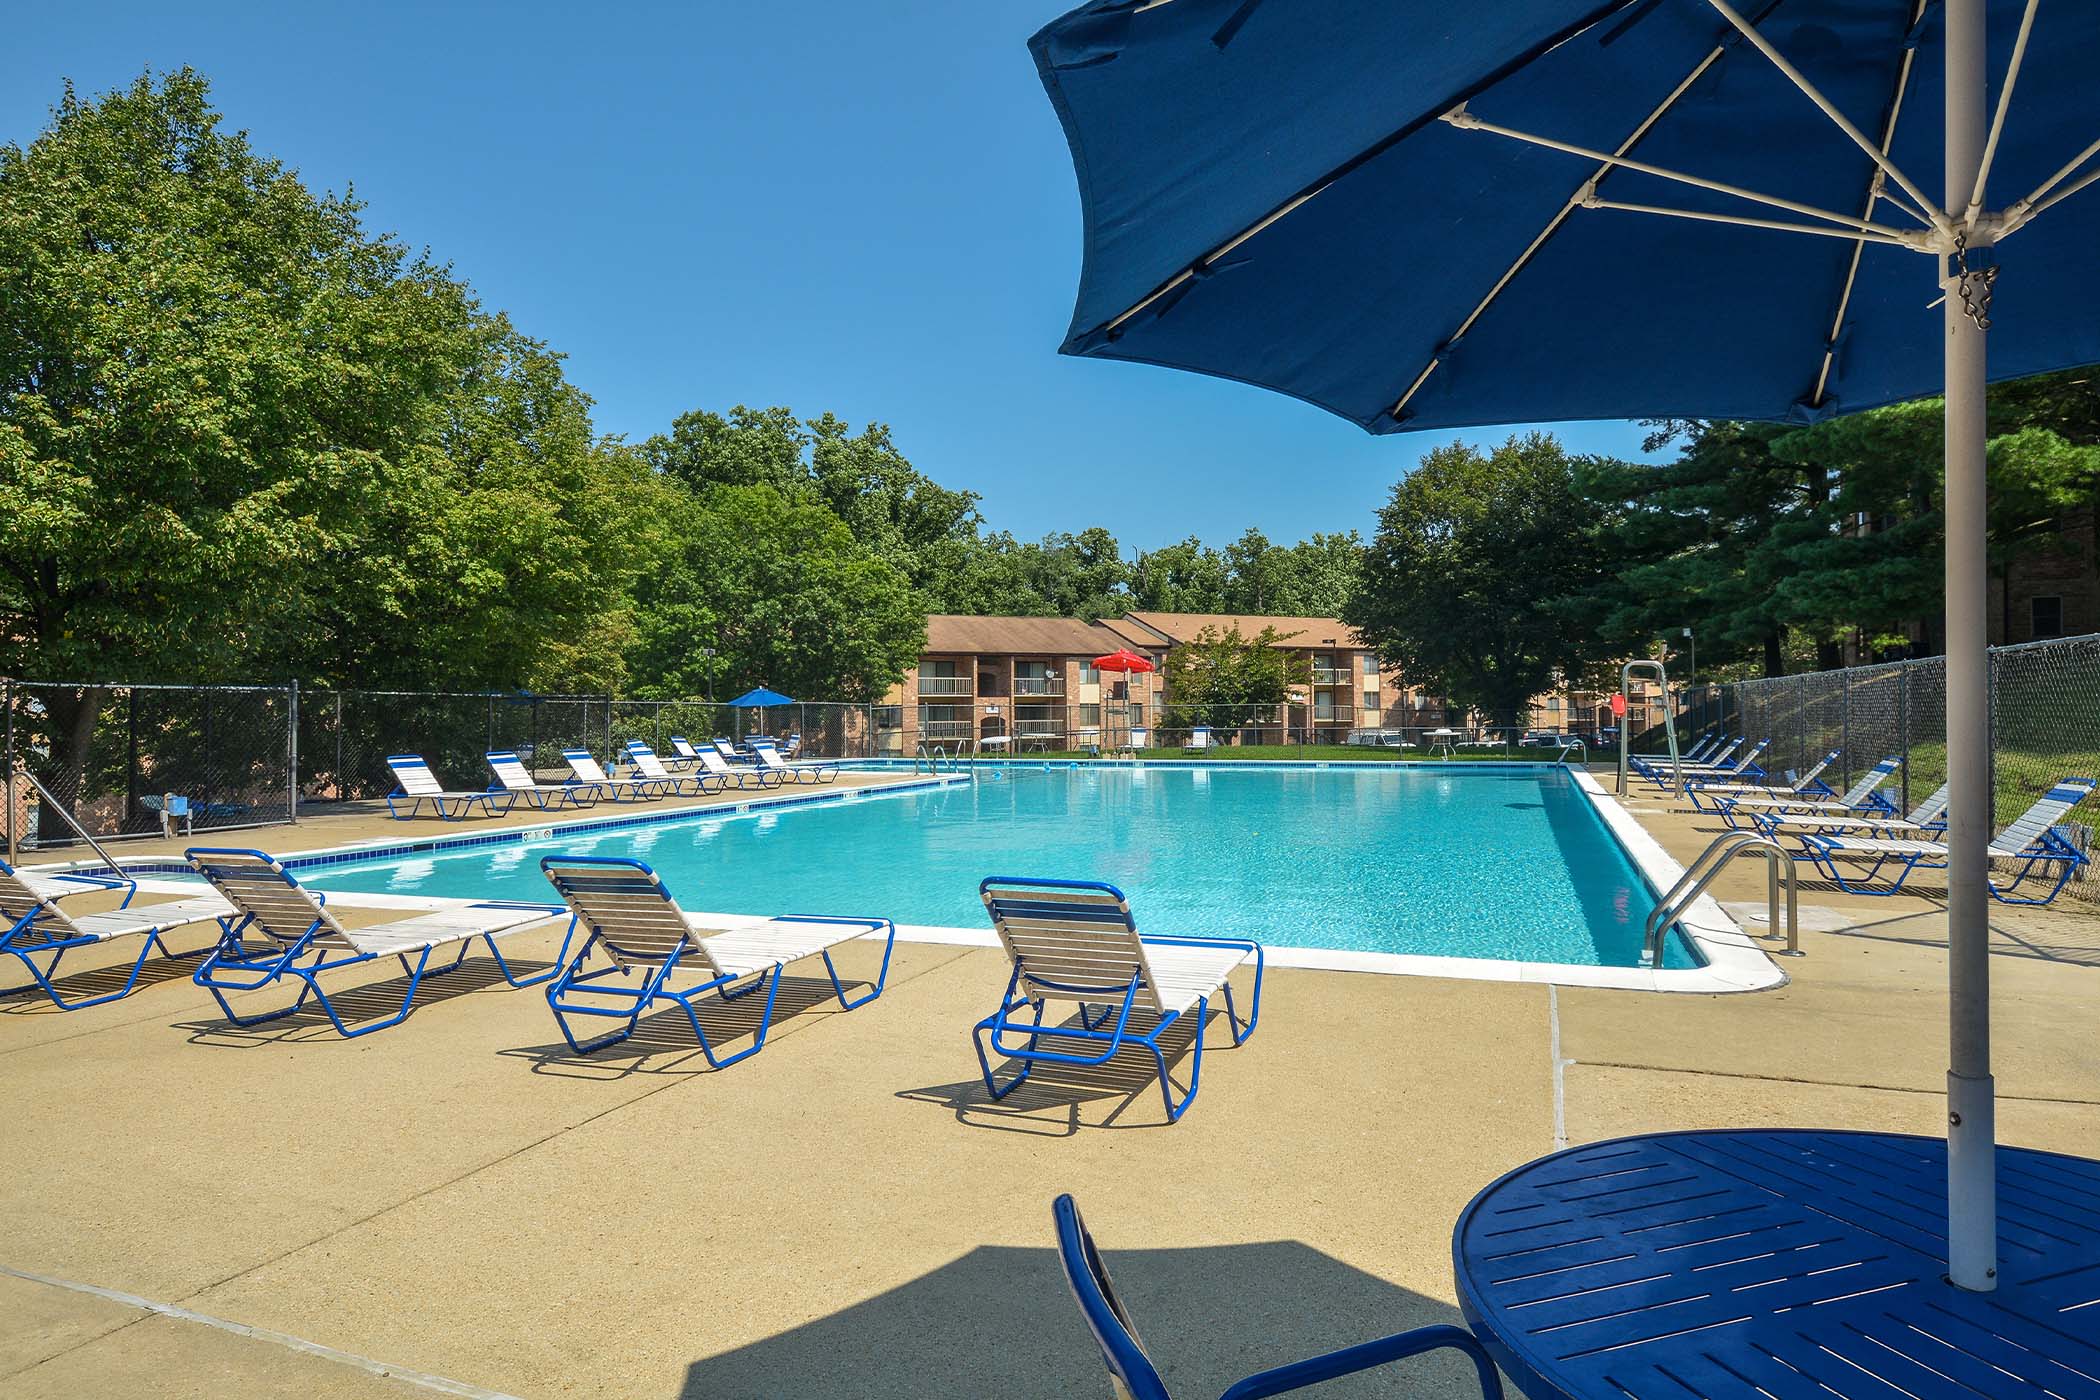 Lounge chairs next to the pool at The Flats at Columbia Pike in Silver Spring, Maryland